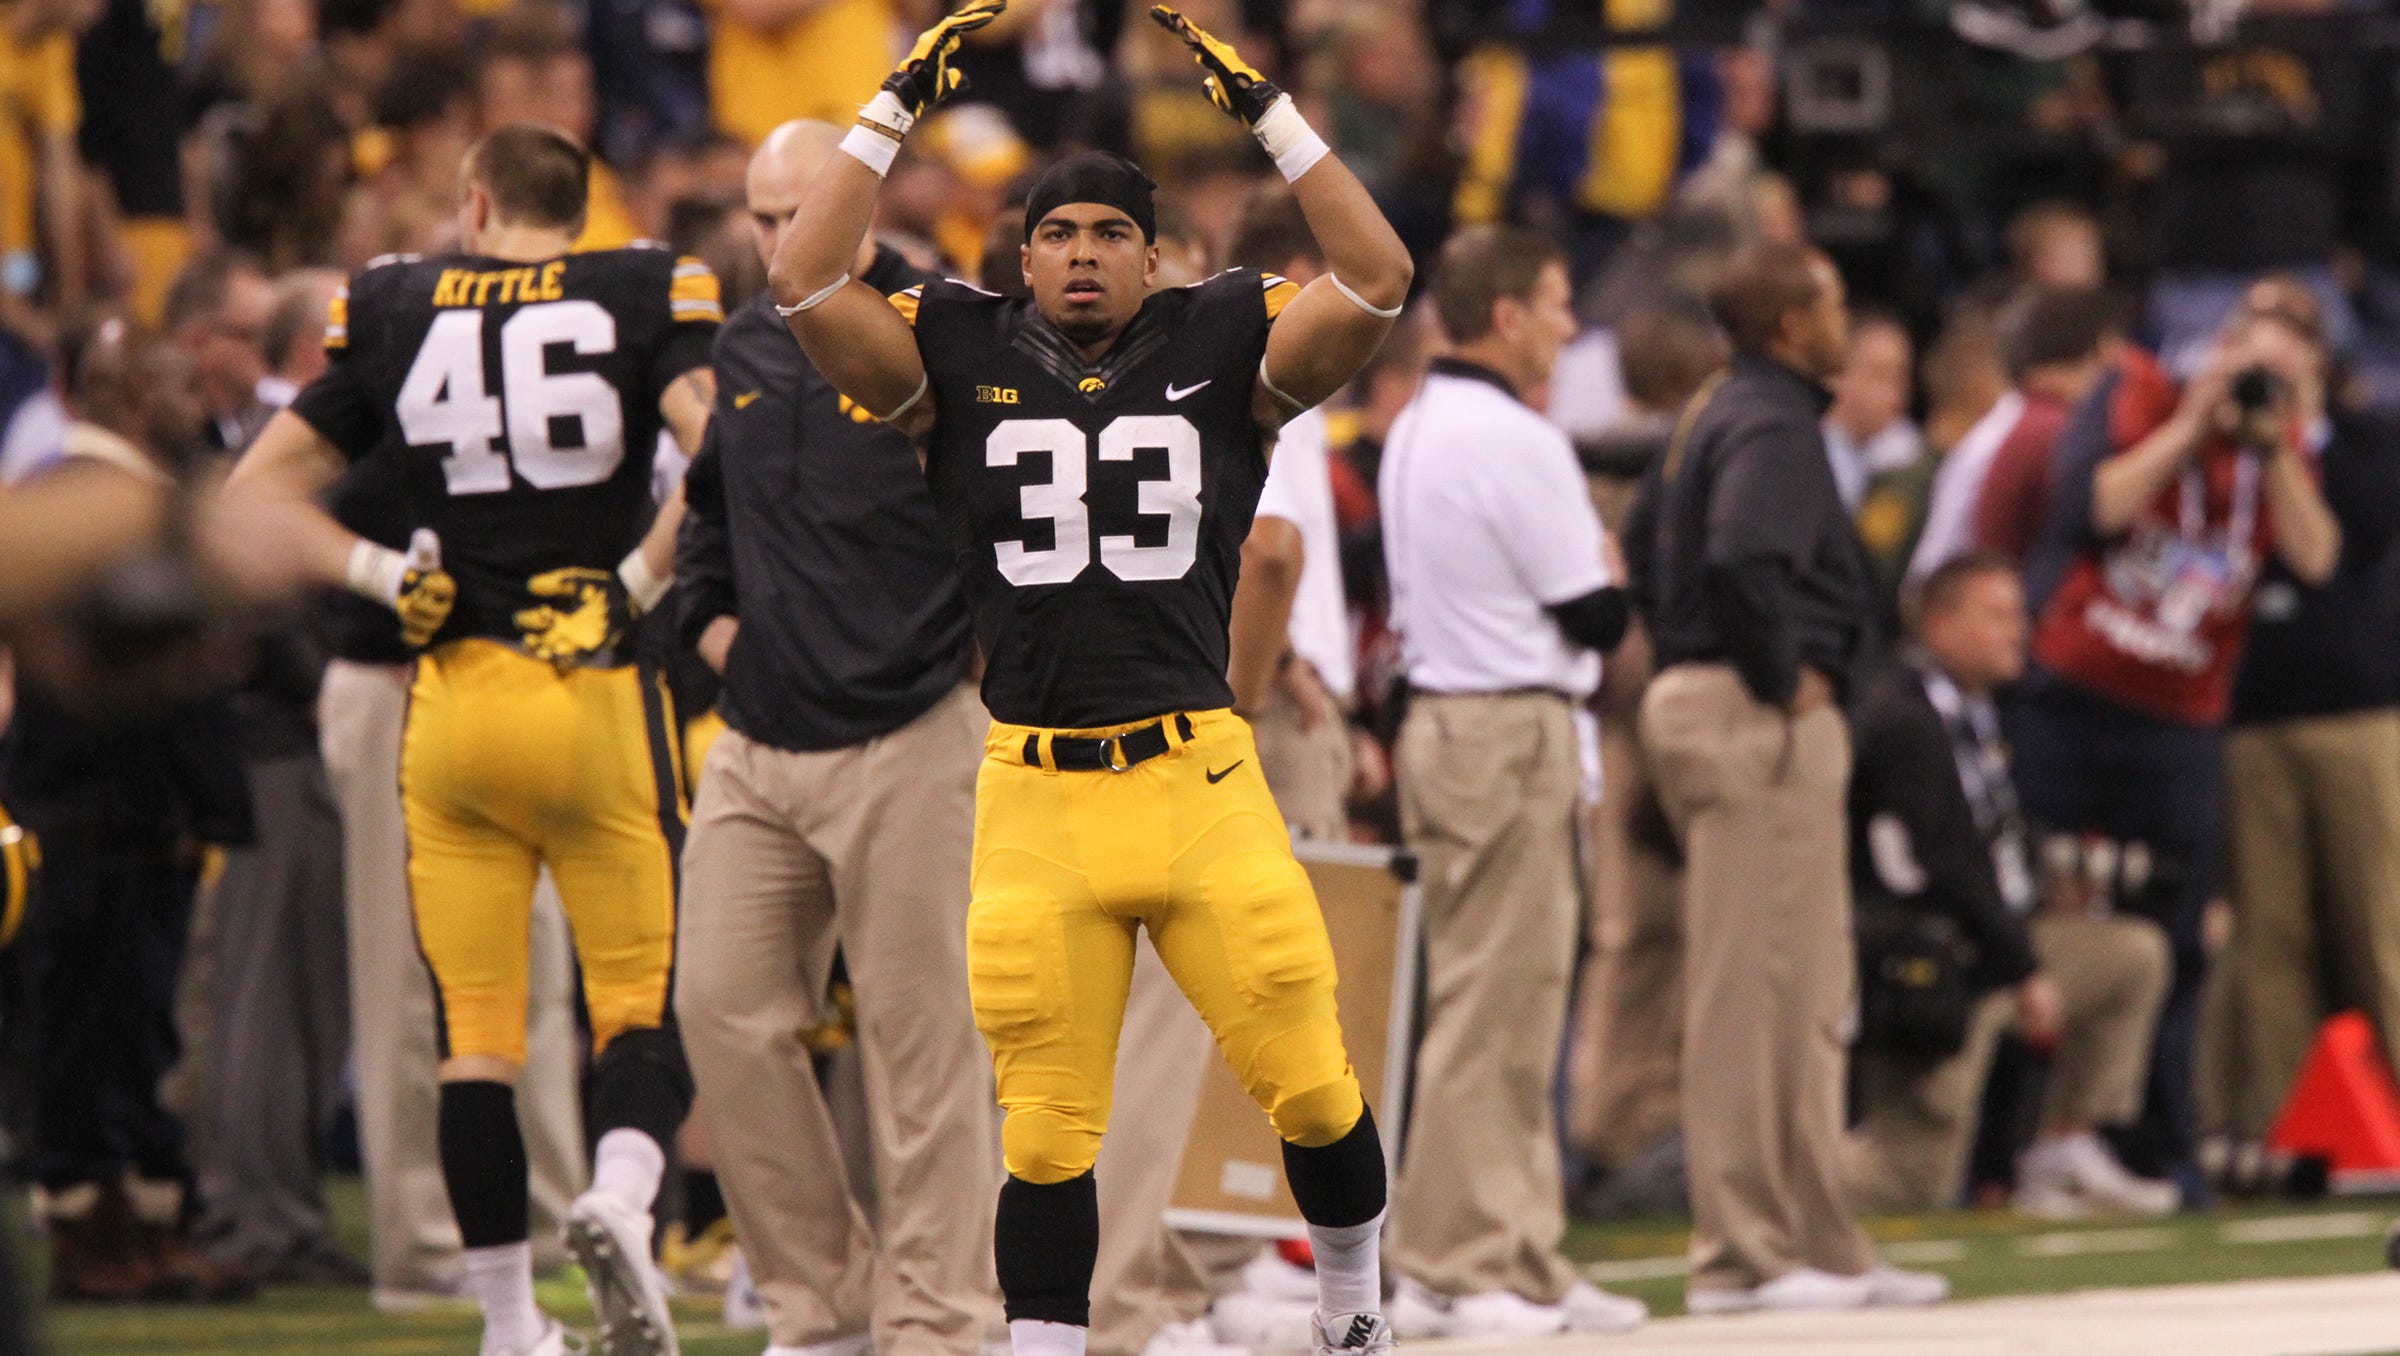 Iowa's Jordan Canzeri tries to pump up the crowd in the final minutes of the Hawkeyes' Big Ten Championship game against Michigan State at Lucas Oil Stadium in Indianapolis, Ind. on Saturday, Dec. 5, 2015.